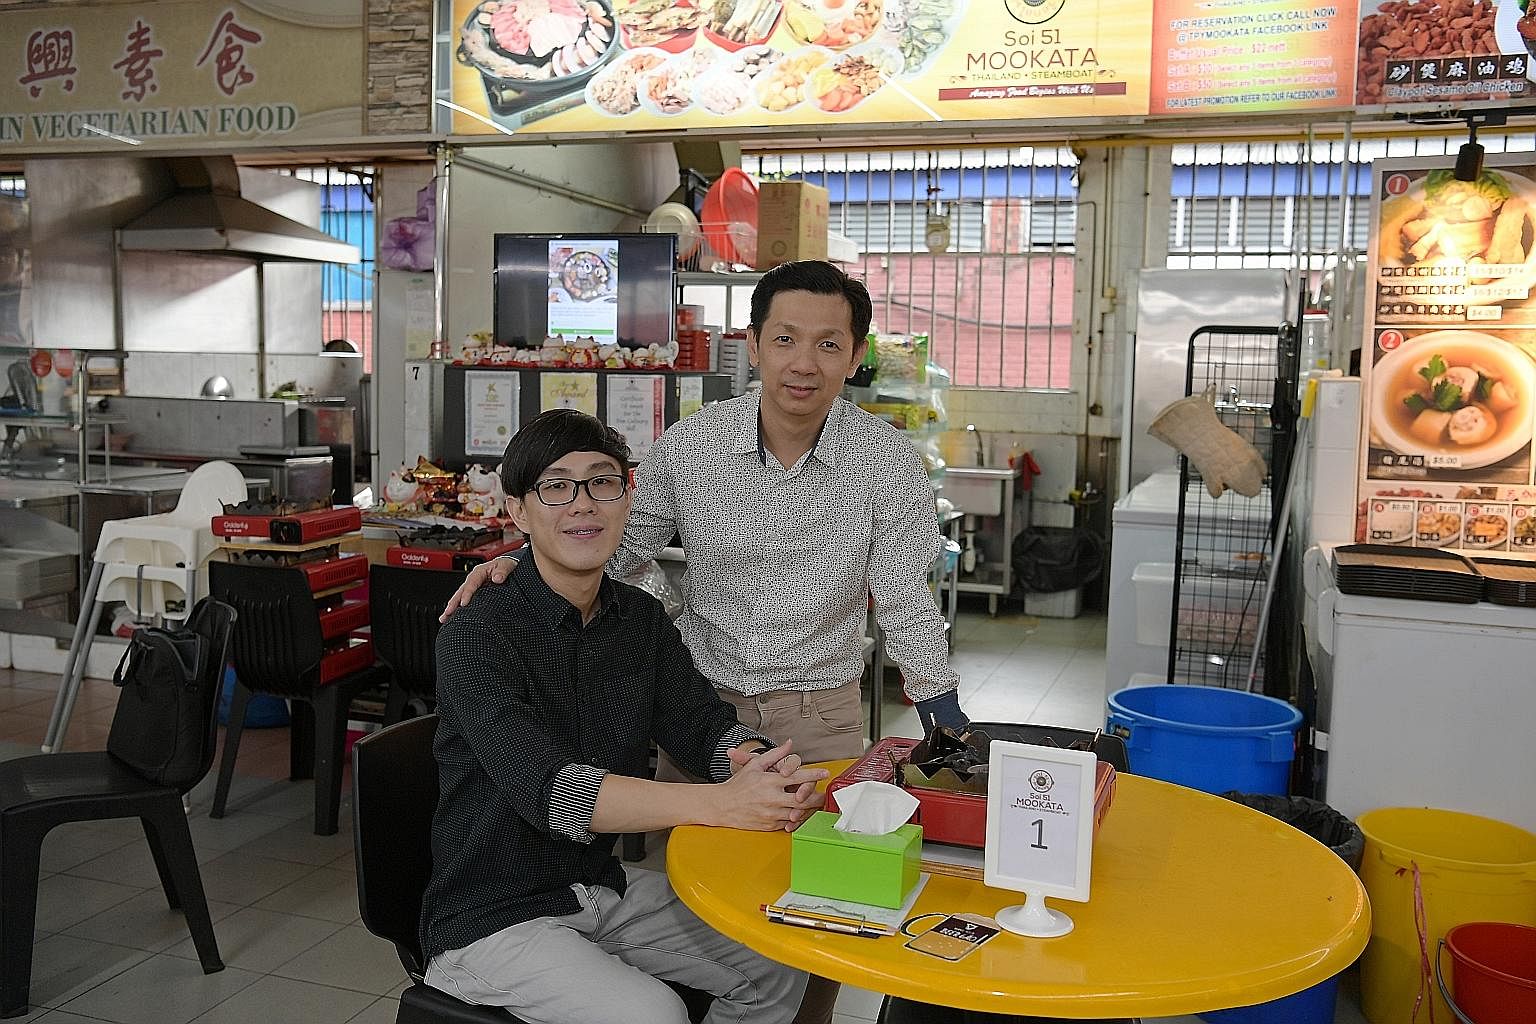 Mr Timothy Cheng (left) says he was blessed to have met Mr Philip Ang, who was a youth worker when he spotted Mr Cheng when he was a boy wandering around aimlessly at a market in Toa Payoh. Mr Cheng's father died when he was just 11, and he had to ca